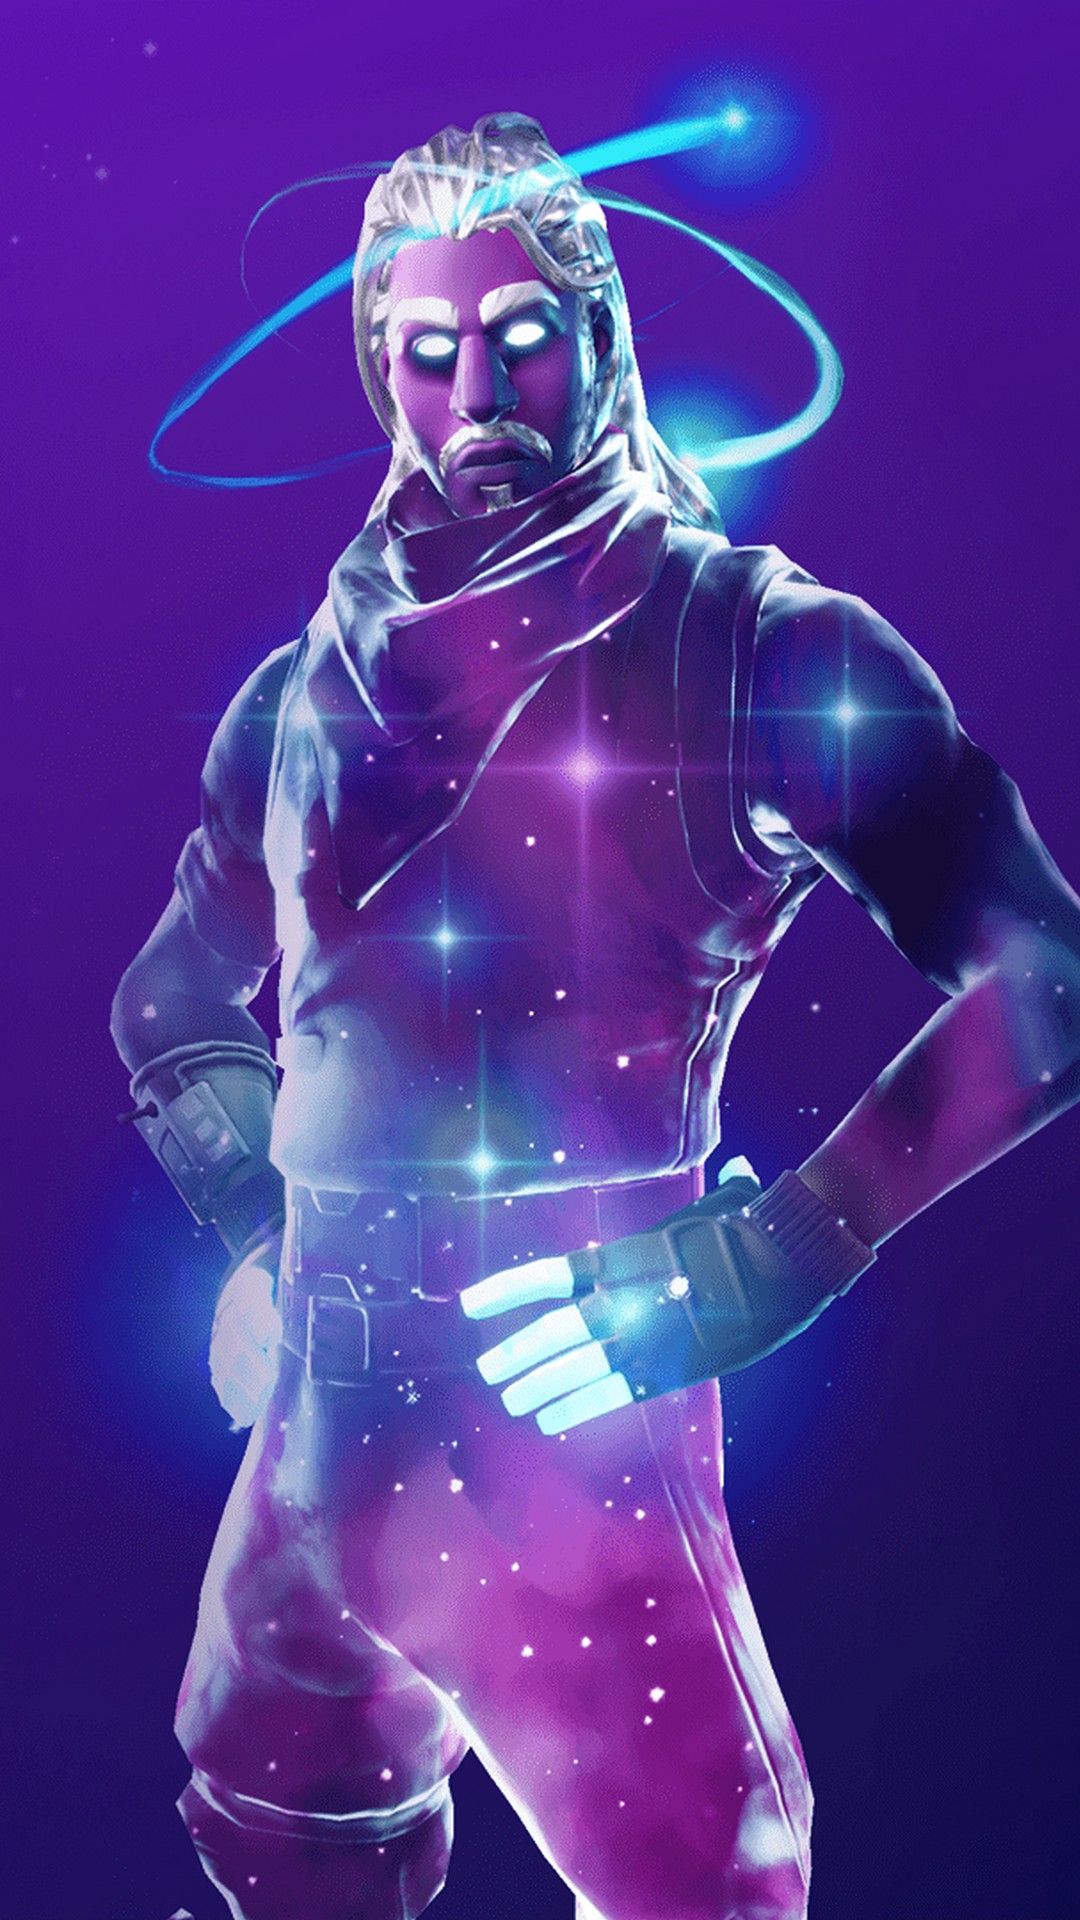 Fortnite For Iphone Wallpapers